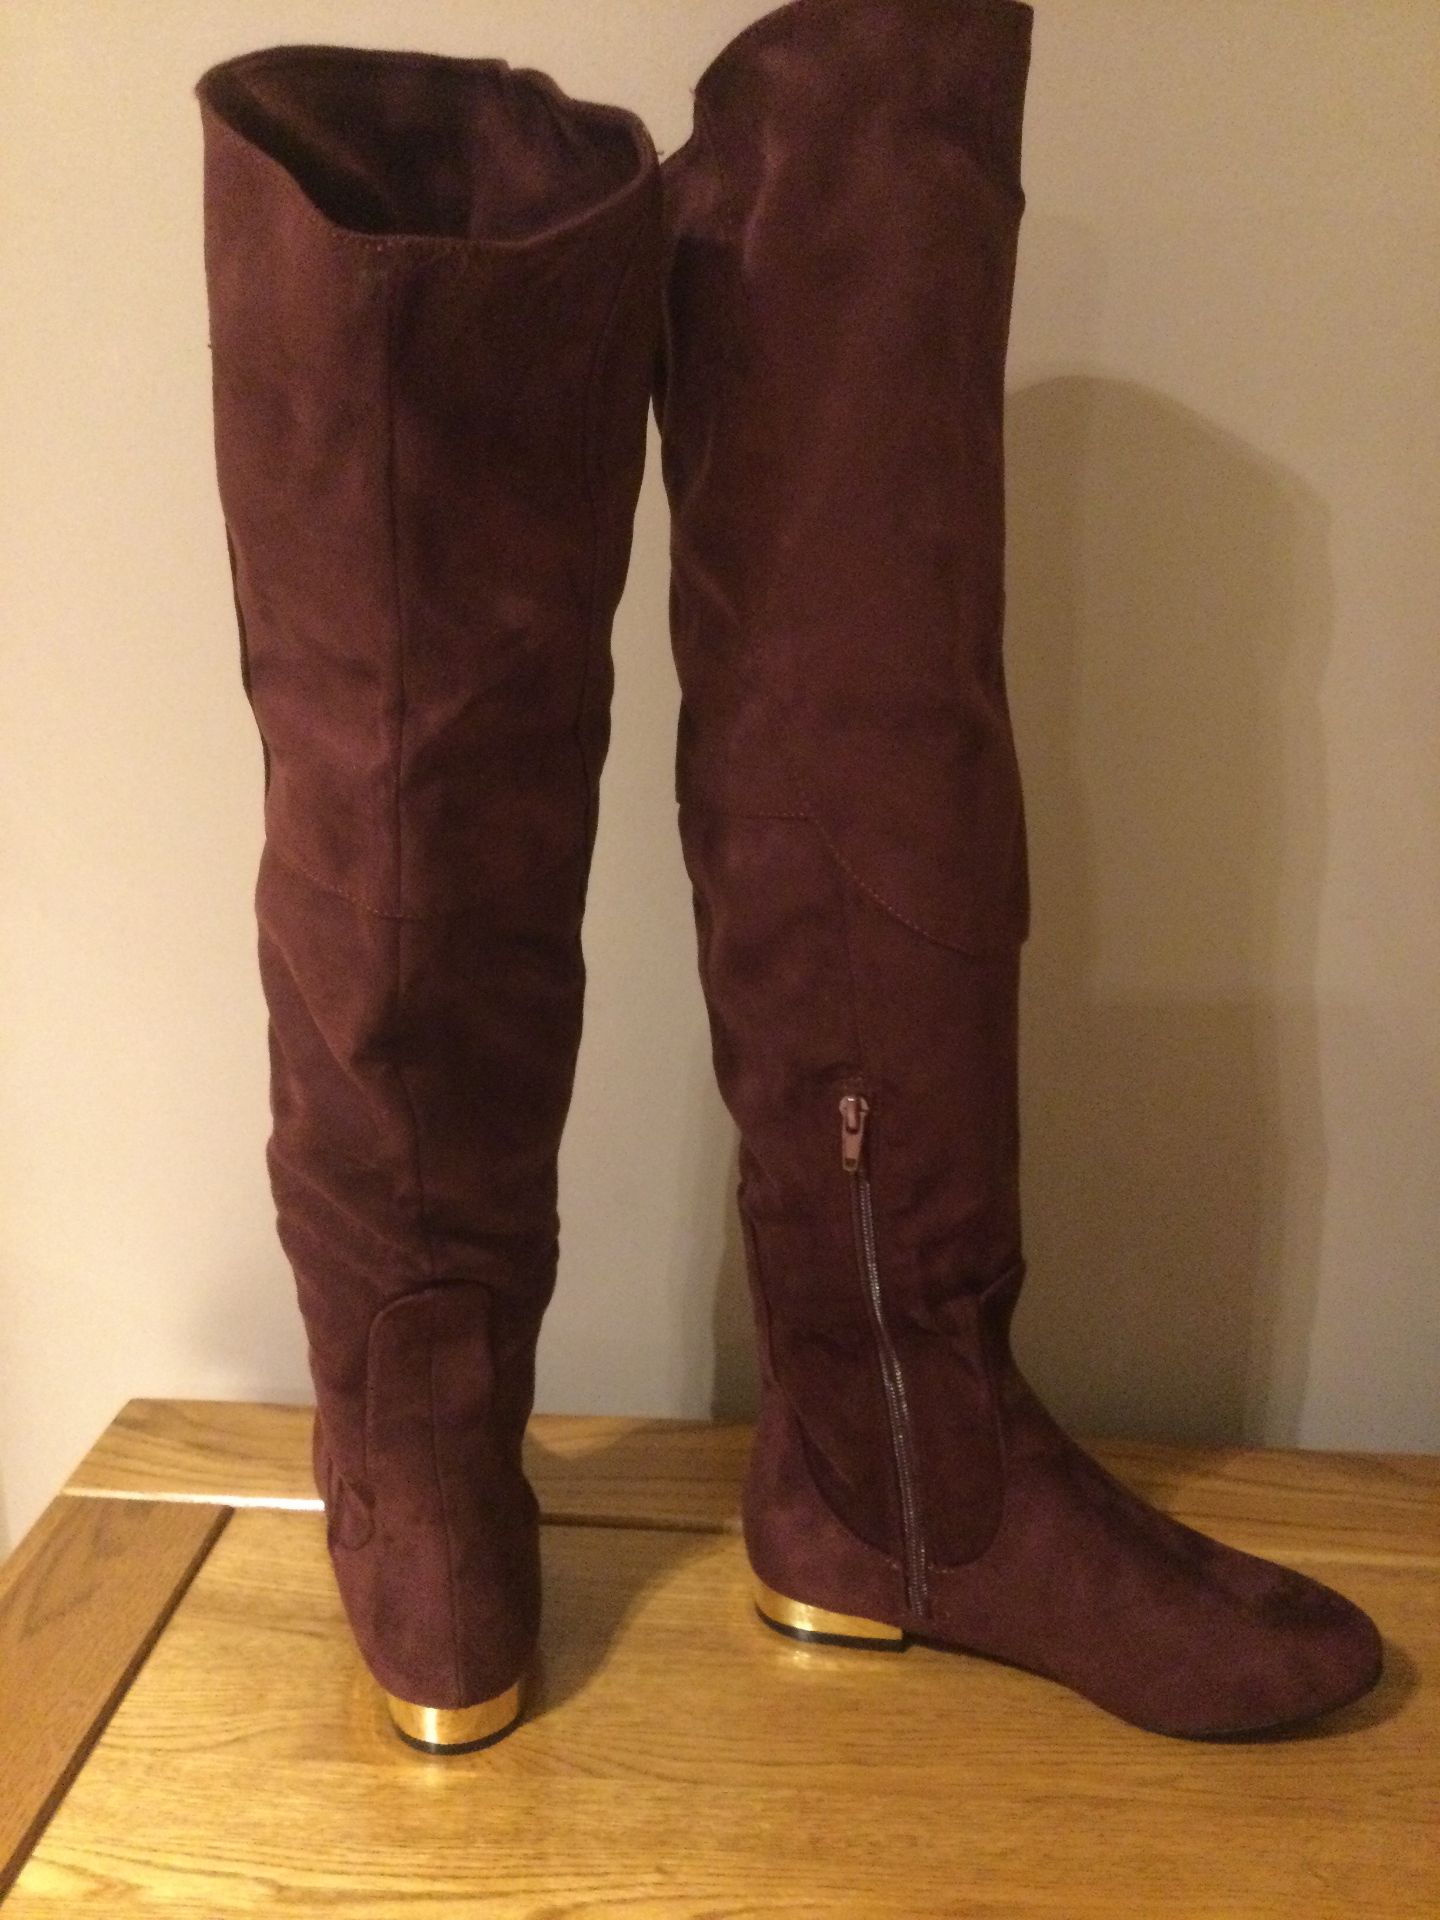 Dolcis “Katie” Long Boots, Low Block Heel, Size 5, Burgundy- New RRP £55.00 - Image 2 of 7